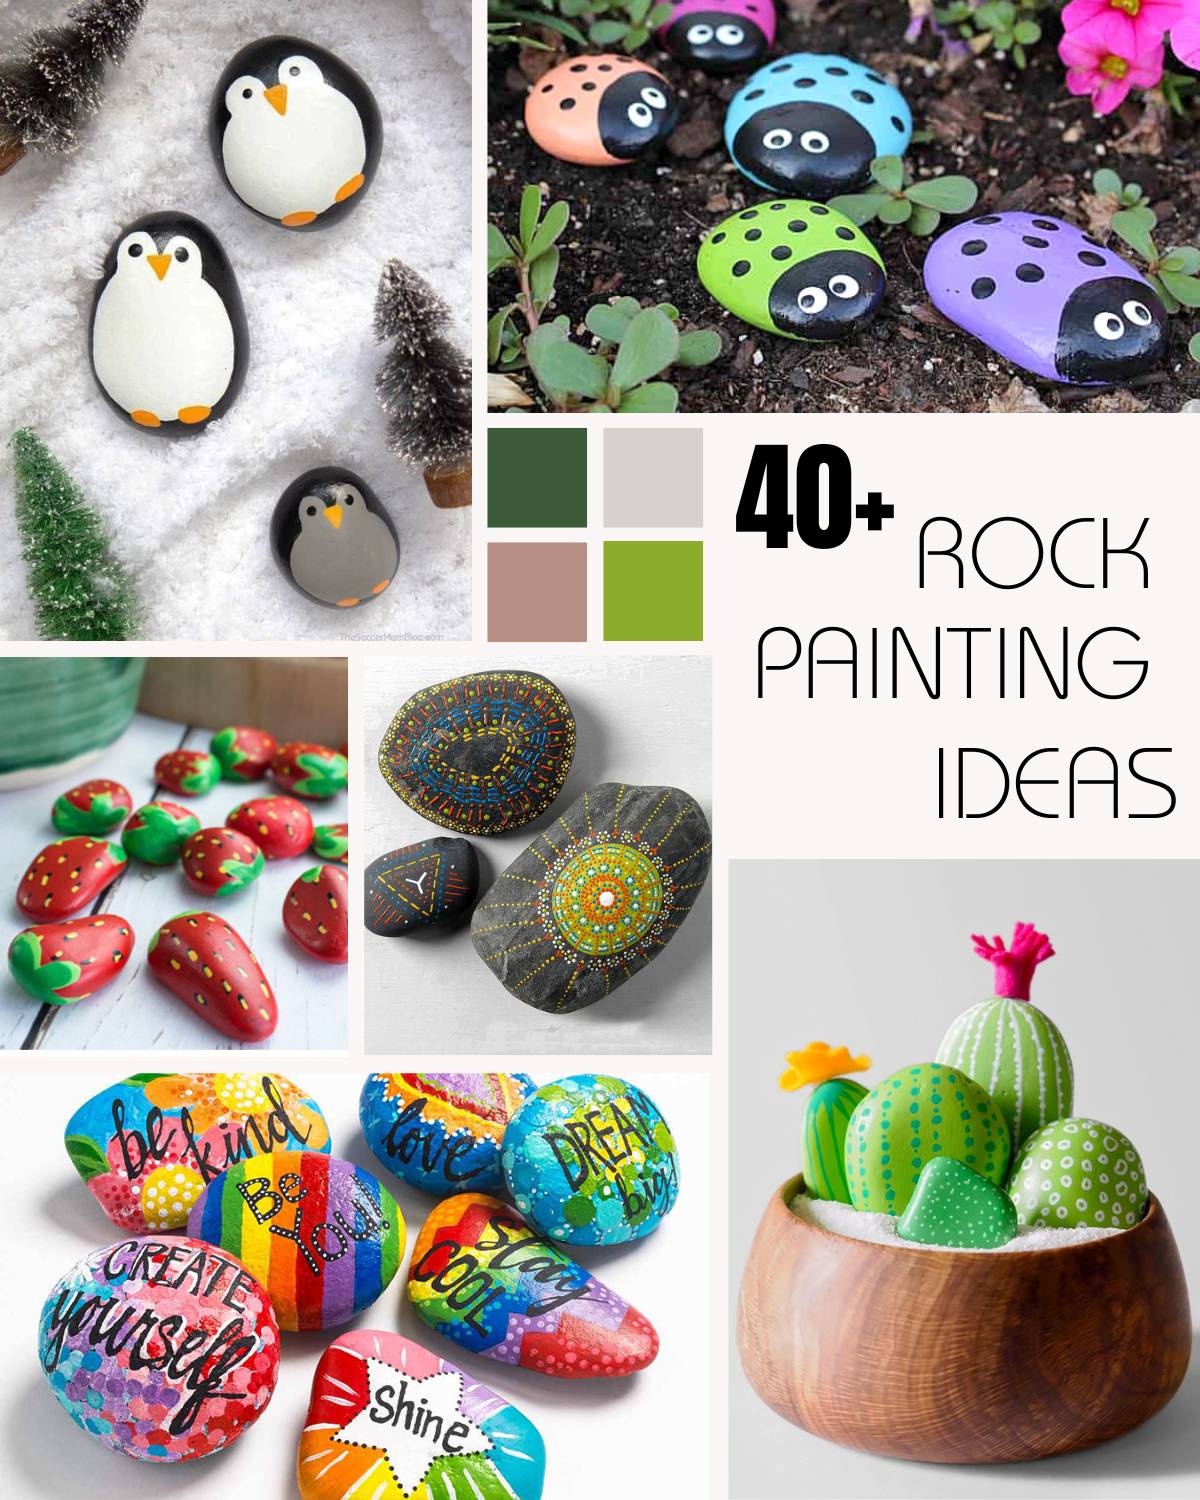 49 rock painting ideas for you to DIY